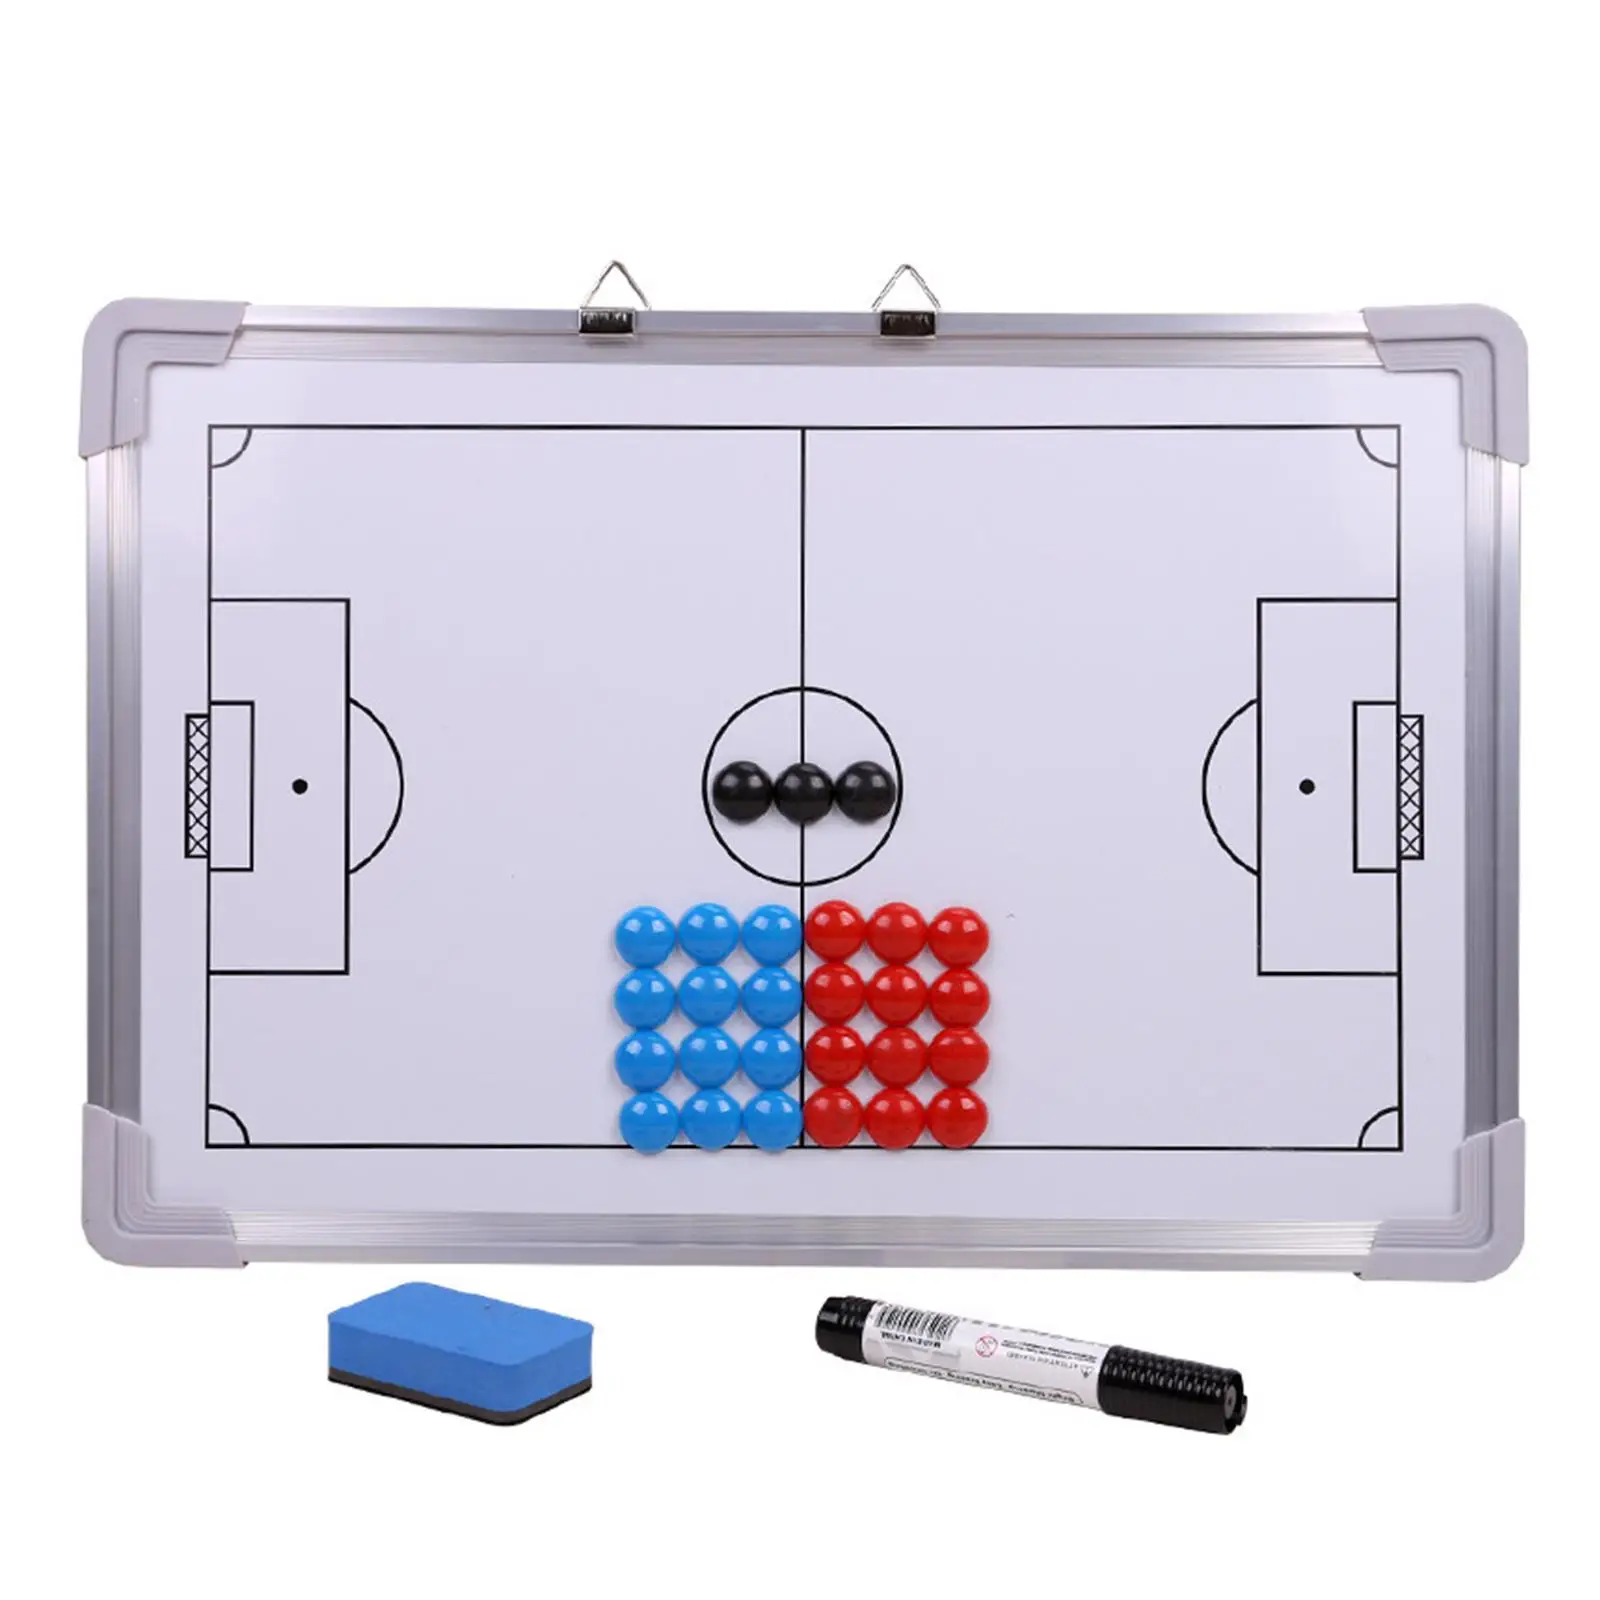 Aluminum Alloy Soccer   with 27 Buttons Easy to Hang Whiteboard